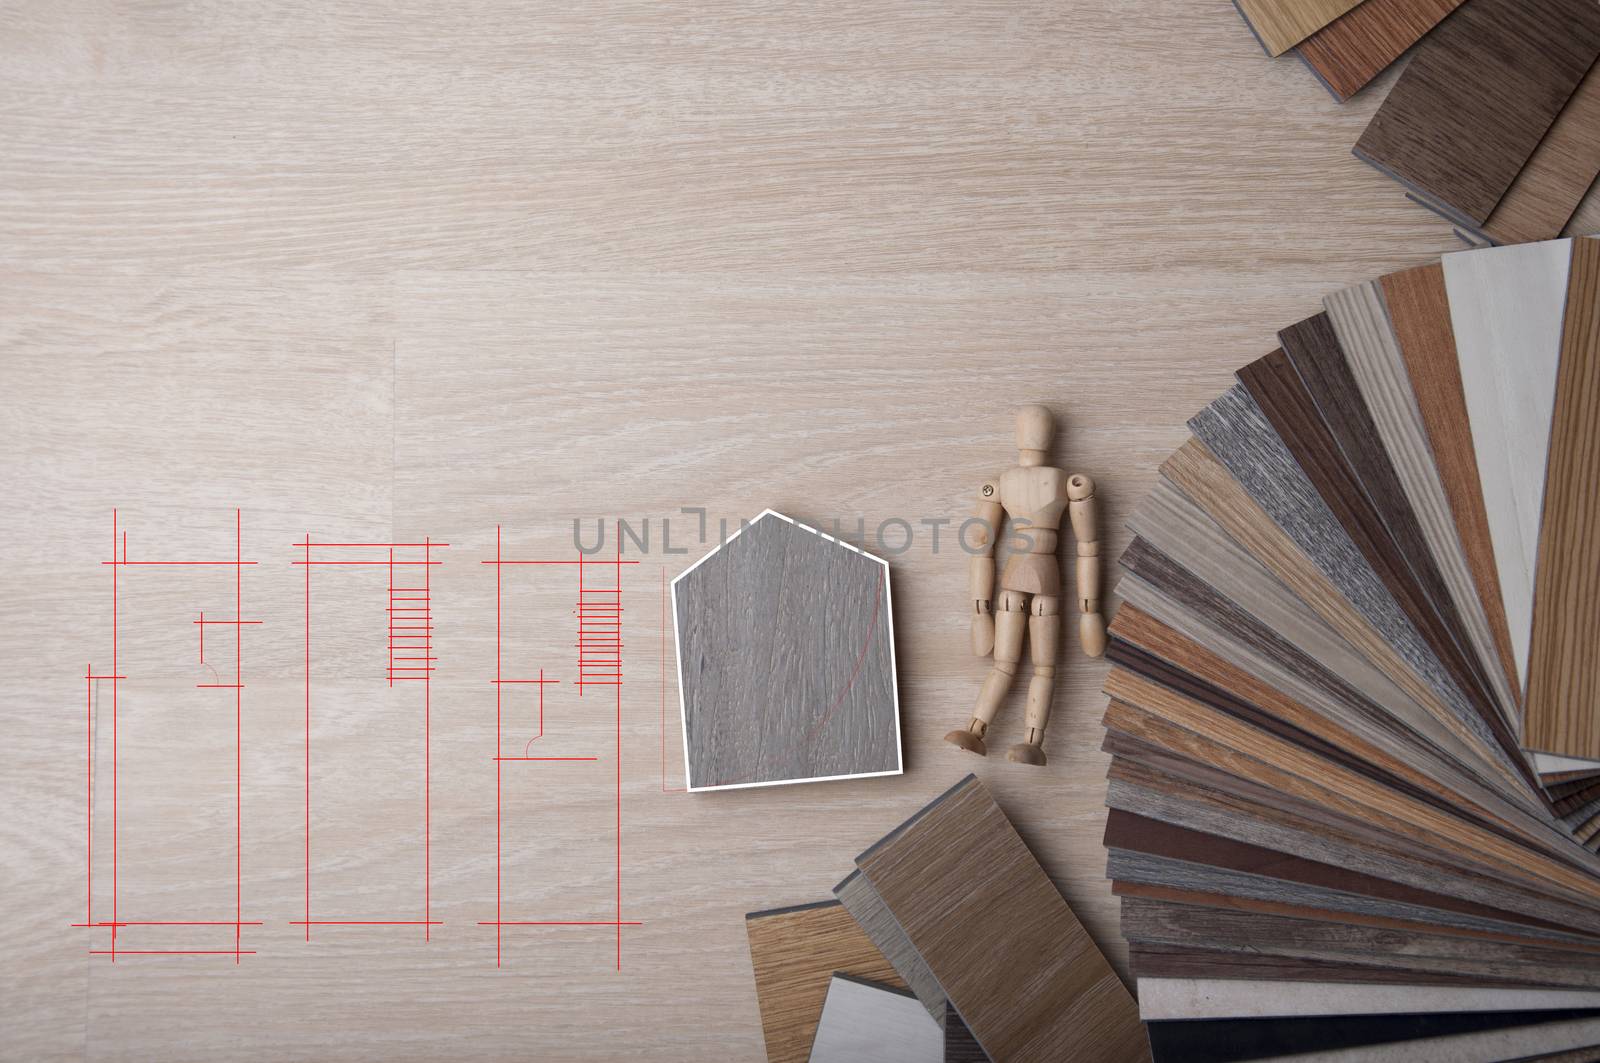 Materials Concept. Top view of wood laminate, veneer, plywood materials on wooden floor. Interior design choose material wood for new home and renovation house. Design concept for home sweet home with wood sample color